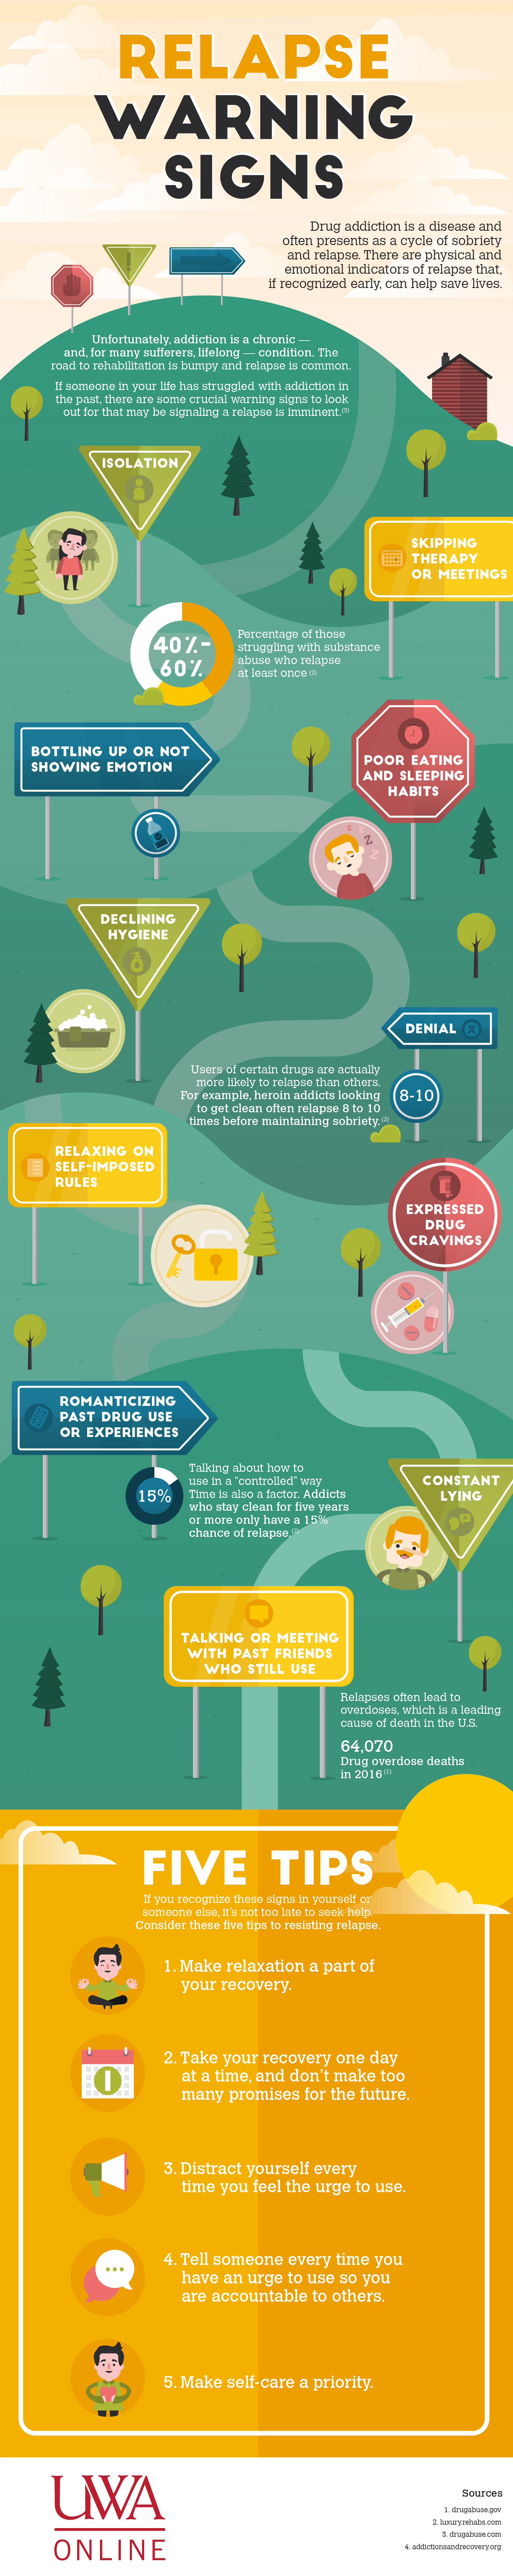 Illustrated infographic with "roadmap" depicting addiction relapse warning signs.